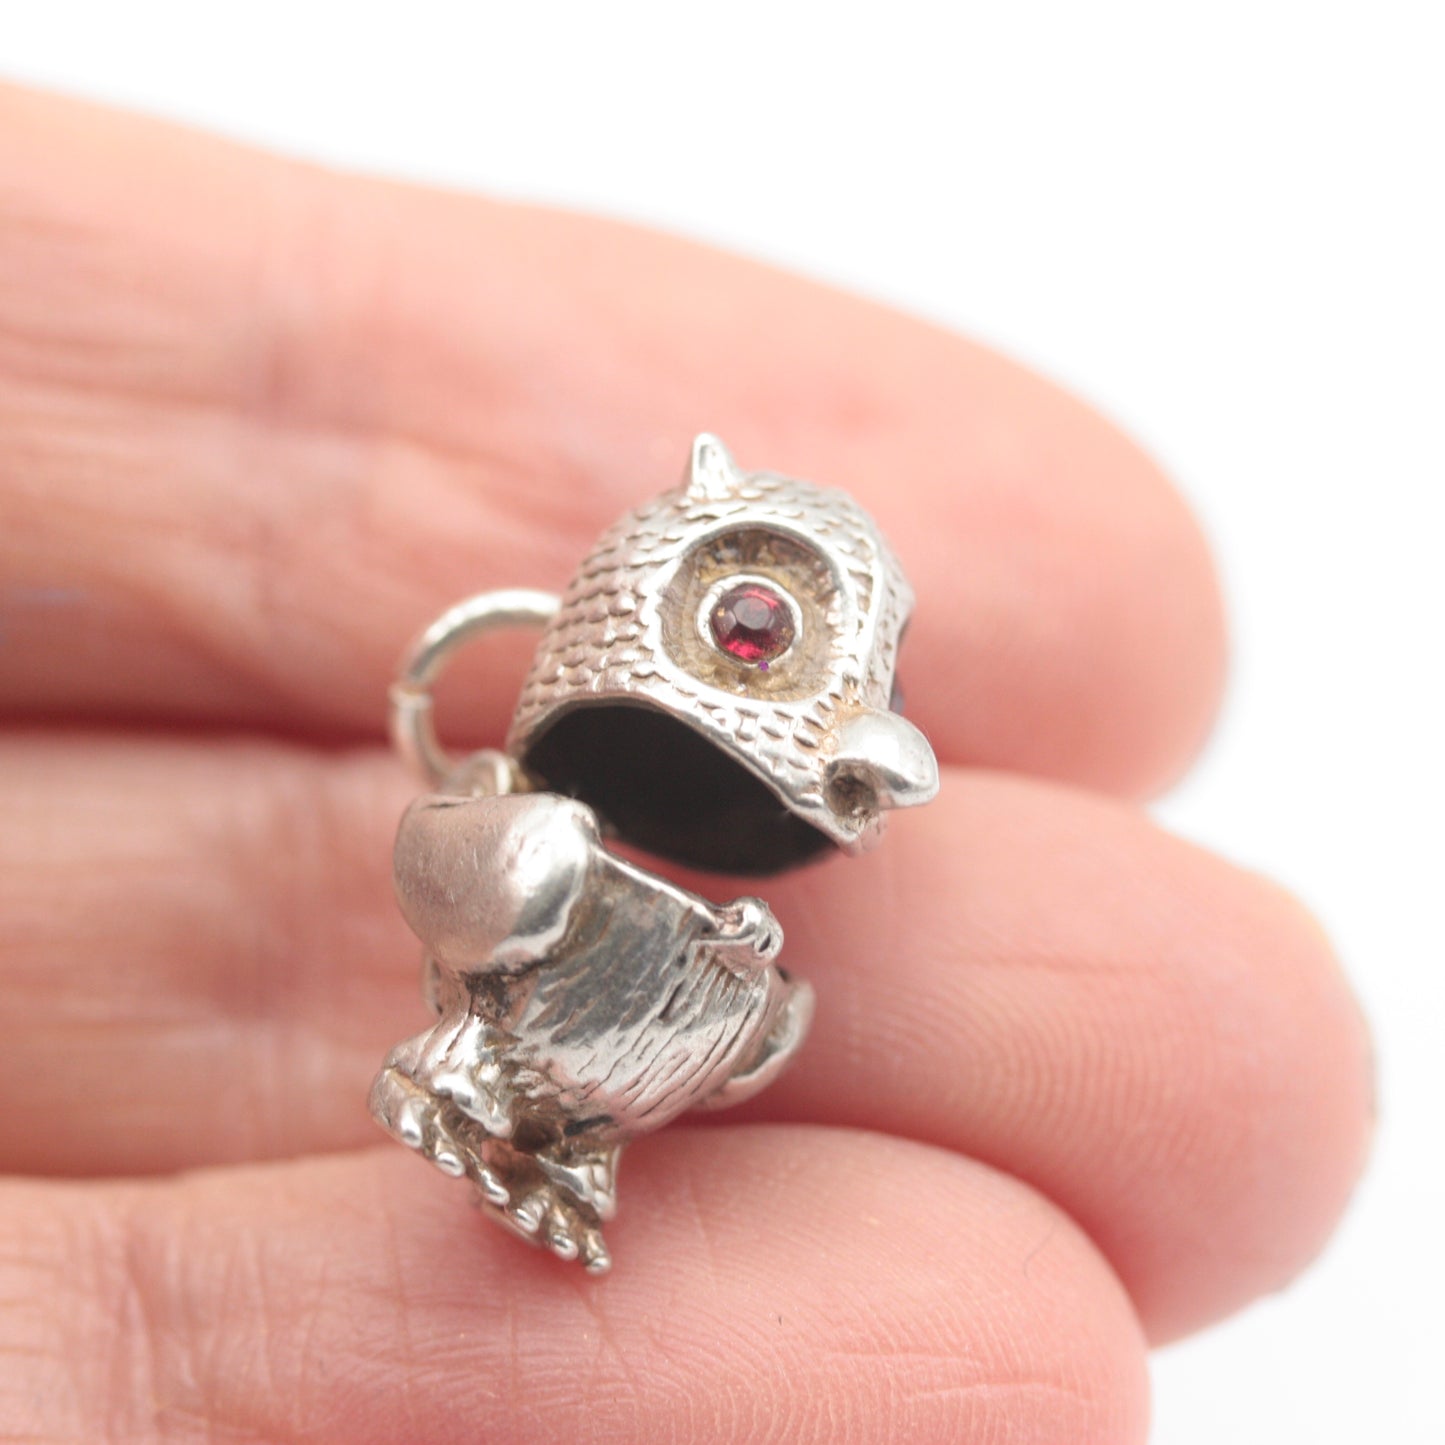 Original Vintage Silver Owl Charm with Red Eyes